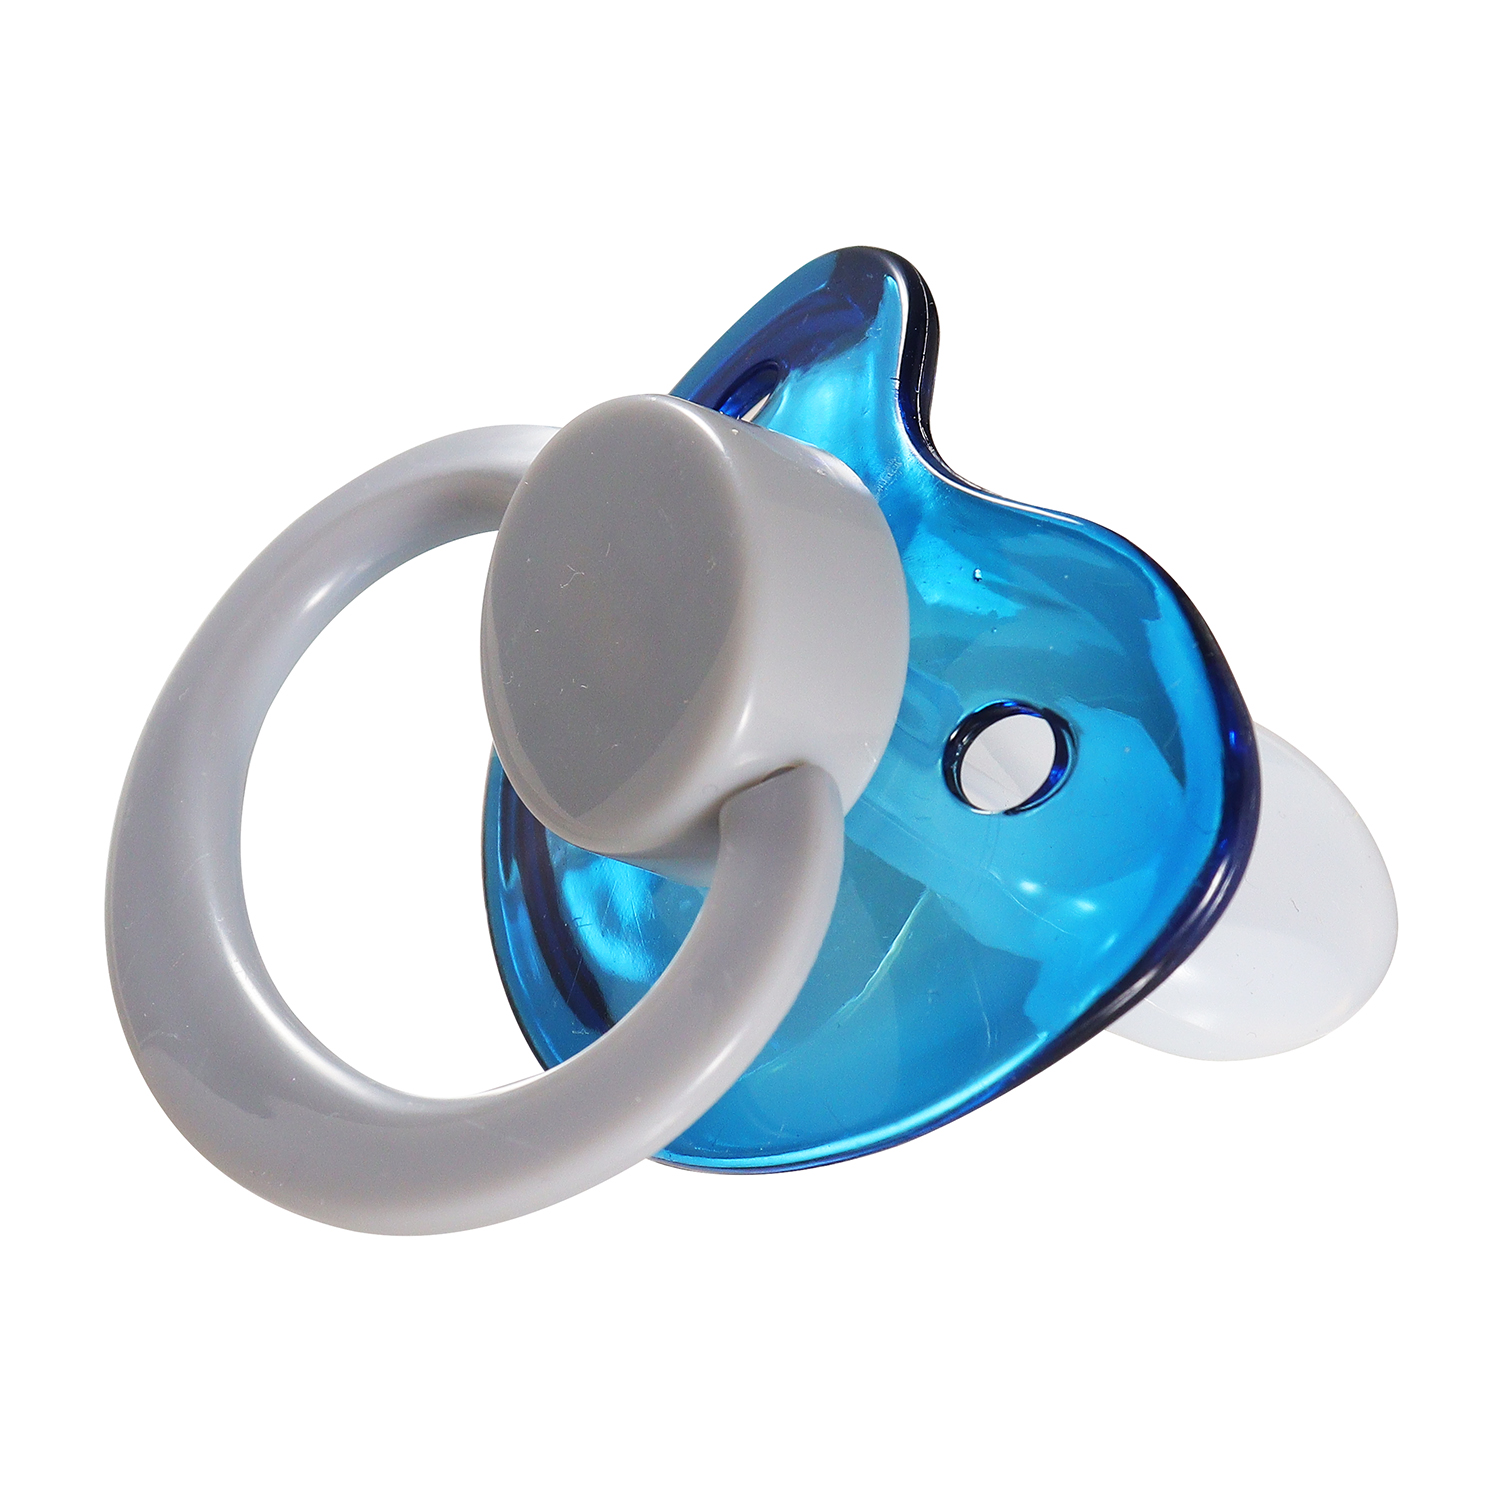 Translucent Blue and White pacifier